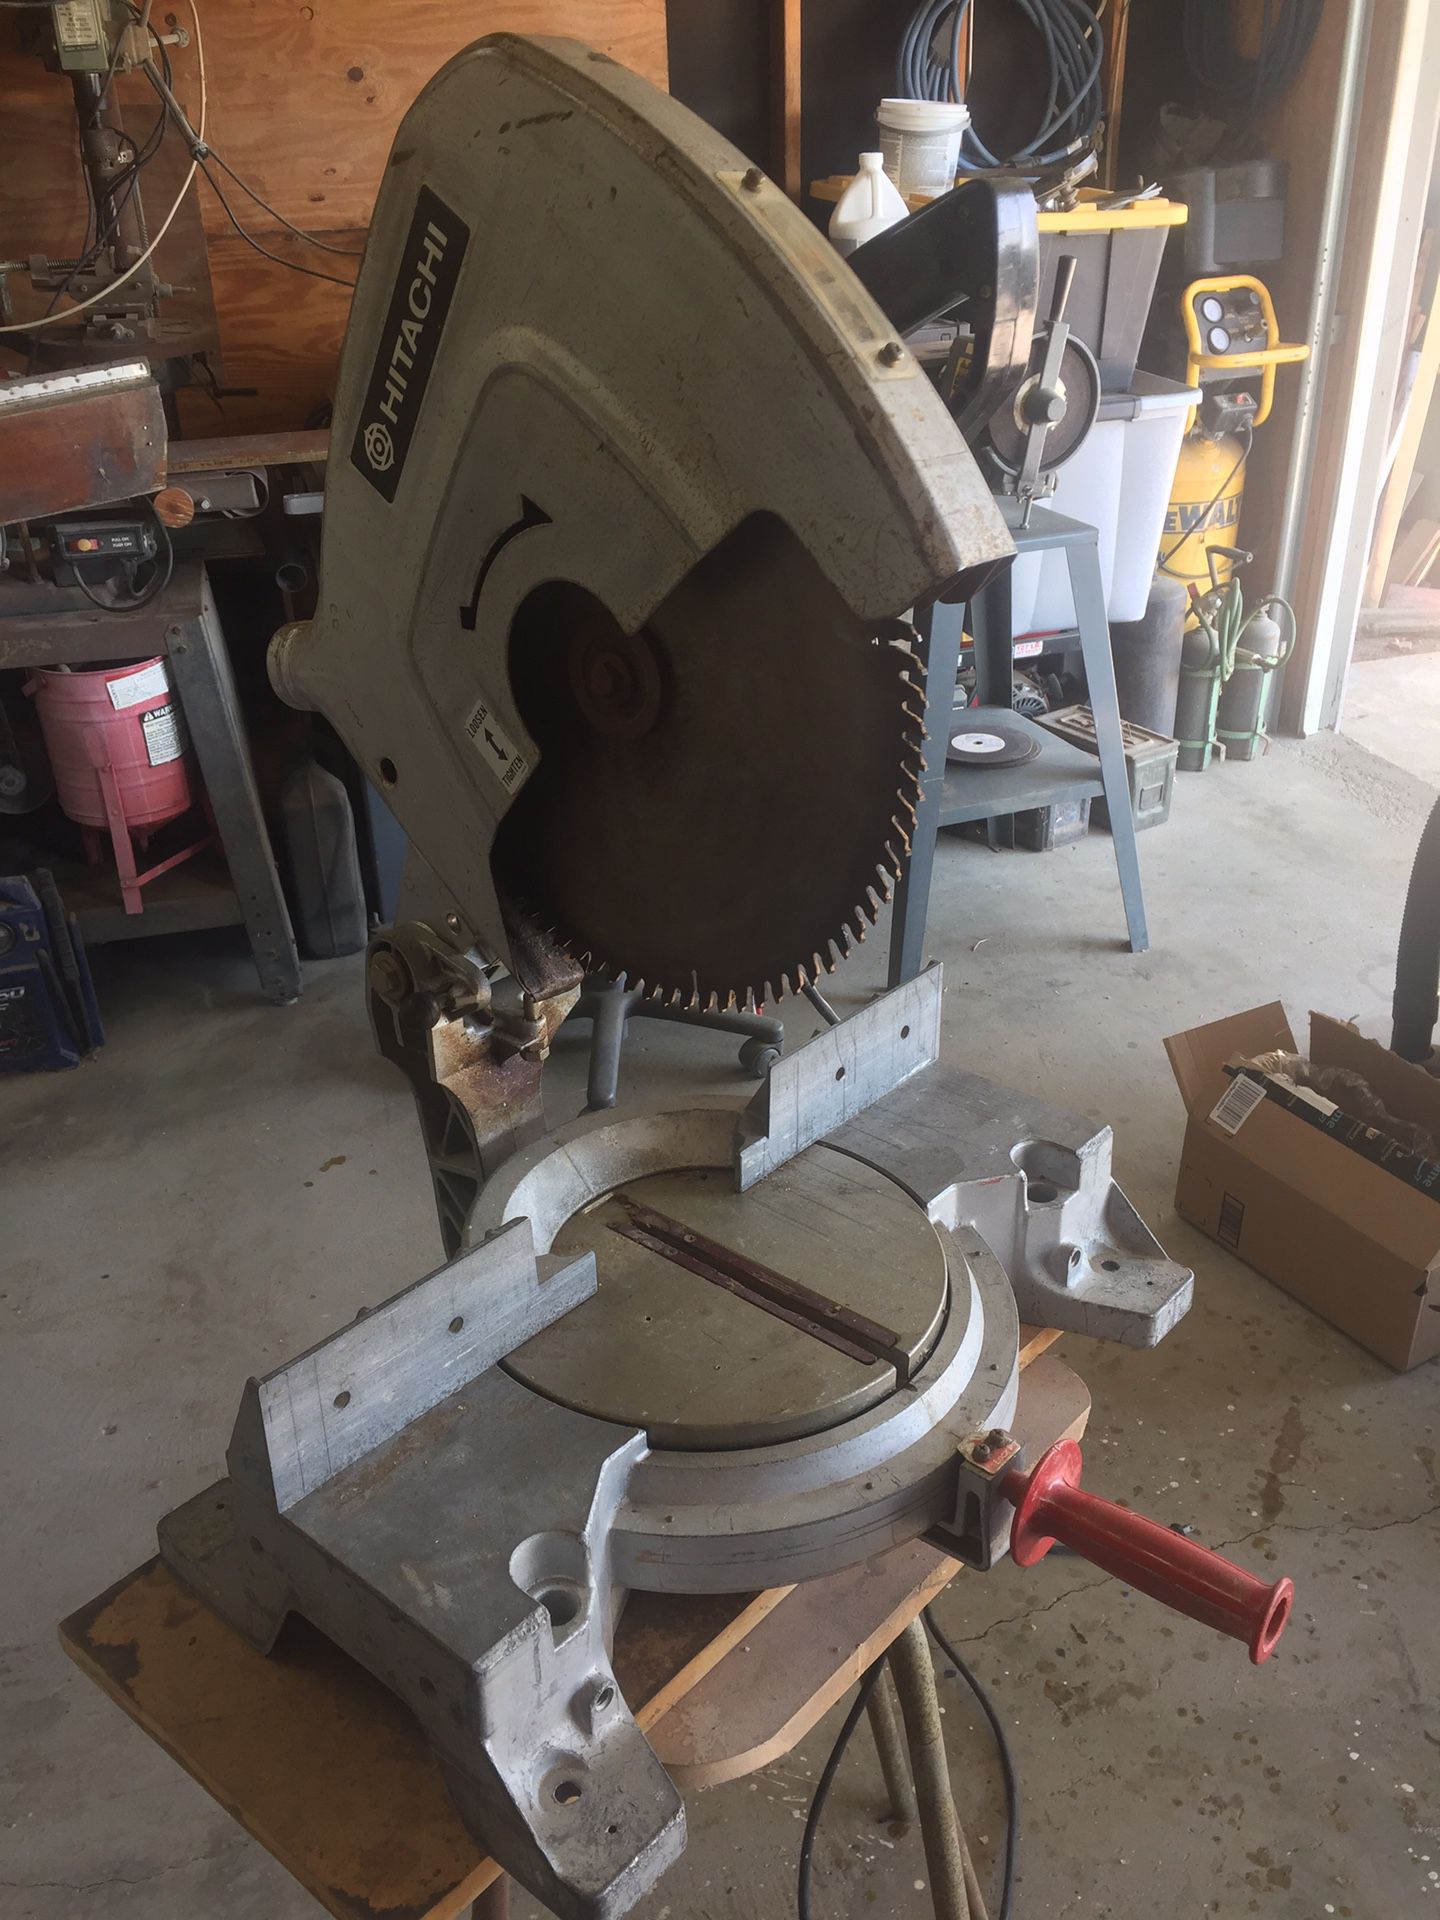 HITACHI 15” MITRE SAW will trade for slide saw or what have you